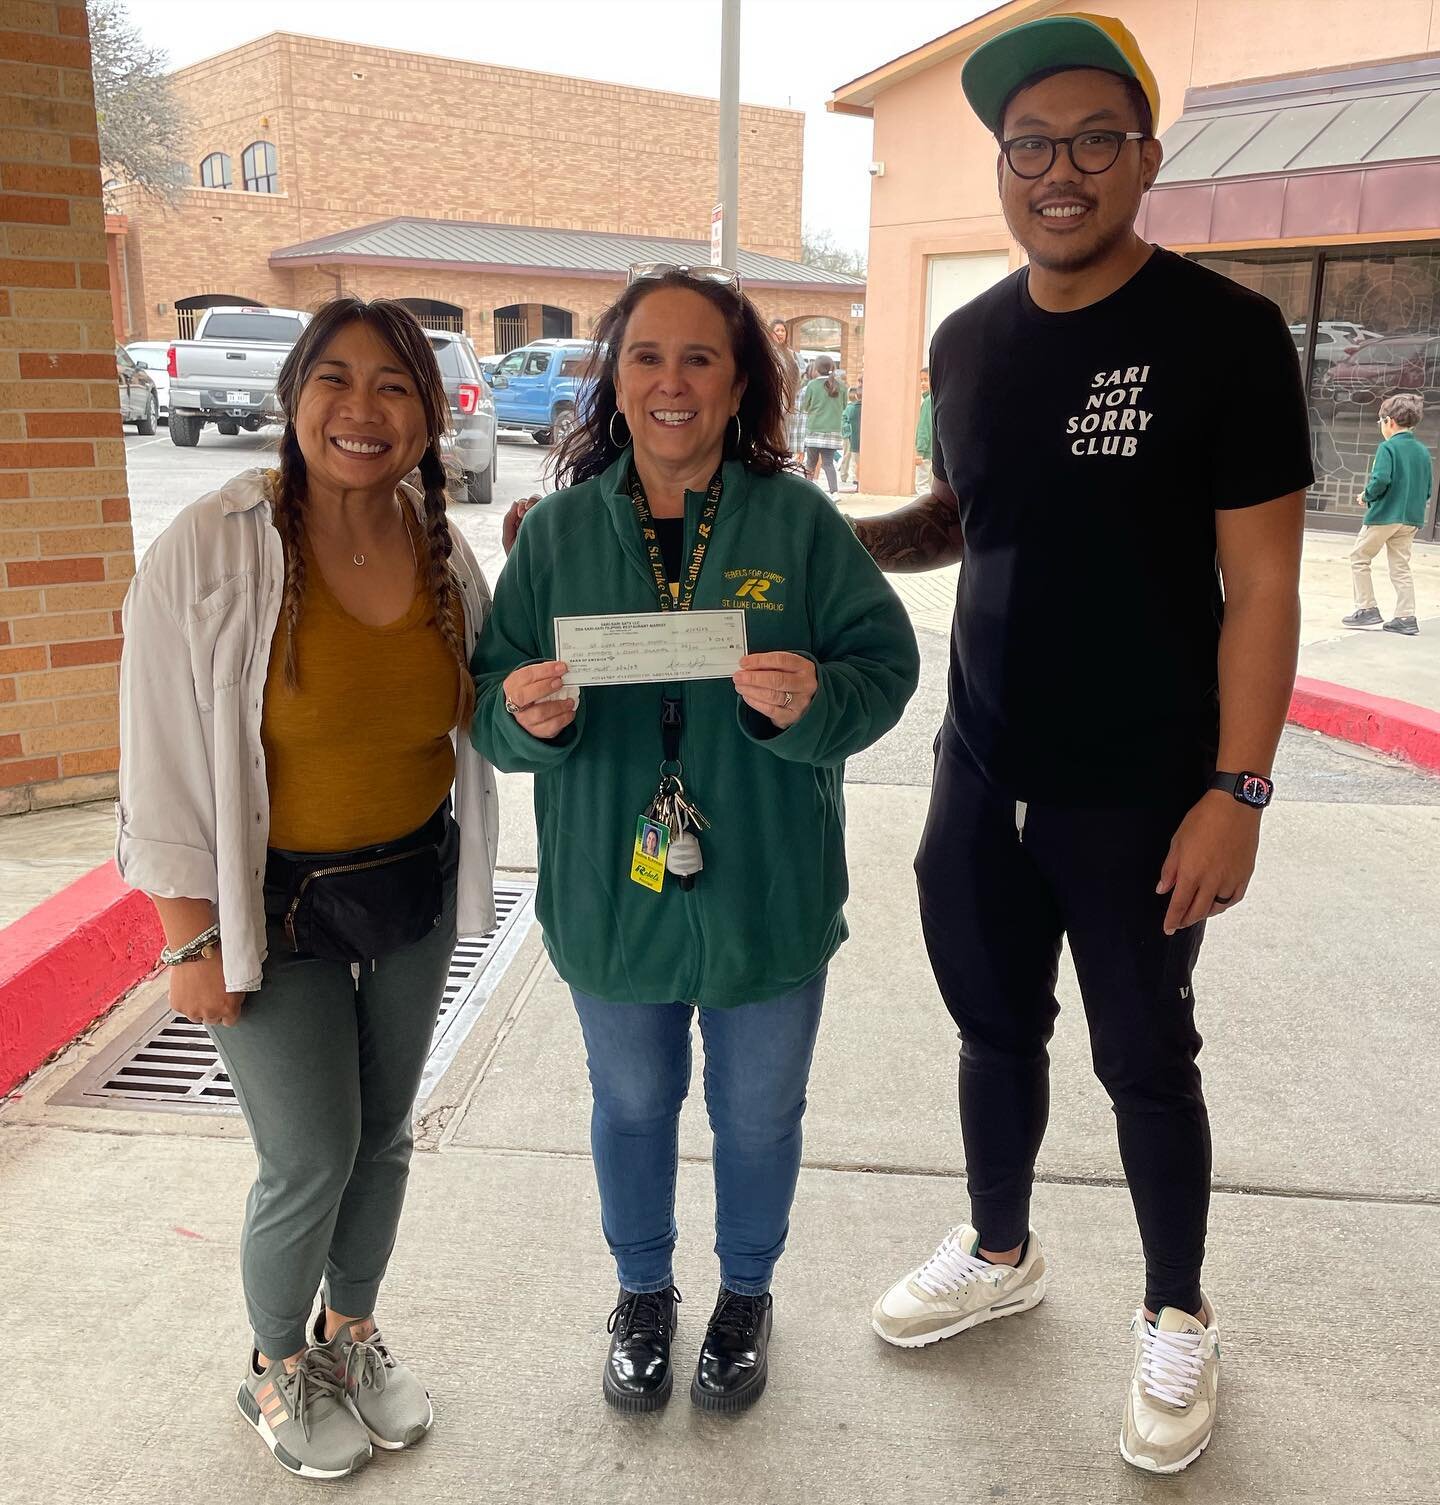 We were able to donate $508.35 to St Luke catholic school for funds raised at Spirit Night! Thank you to everyone who was able to come out and support 🙏🏽

&ldquo;Love Binds Us Together.&rdquo;